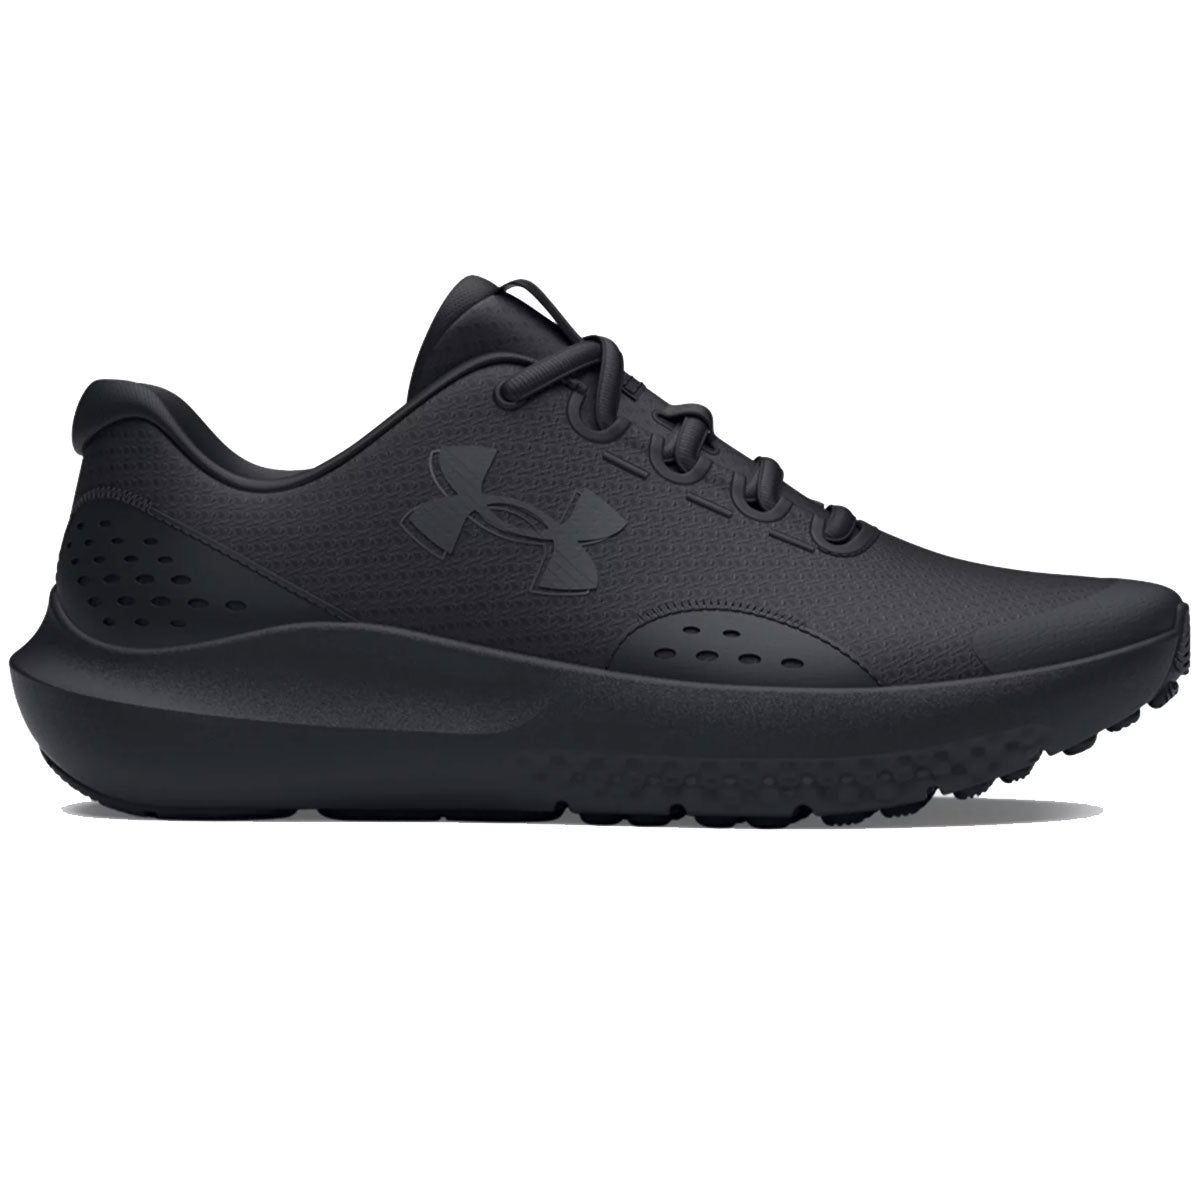 Under Armour BGS Surge 4 Running Shoes - Boys - Black